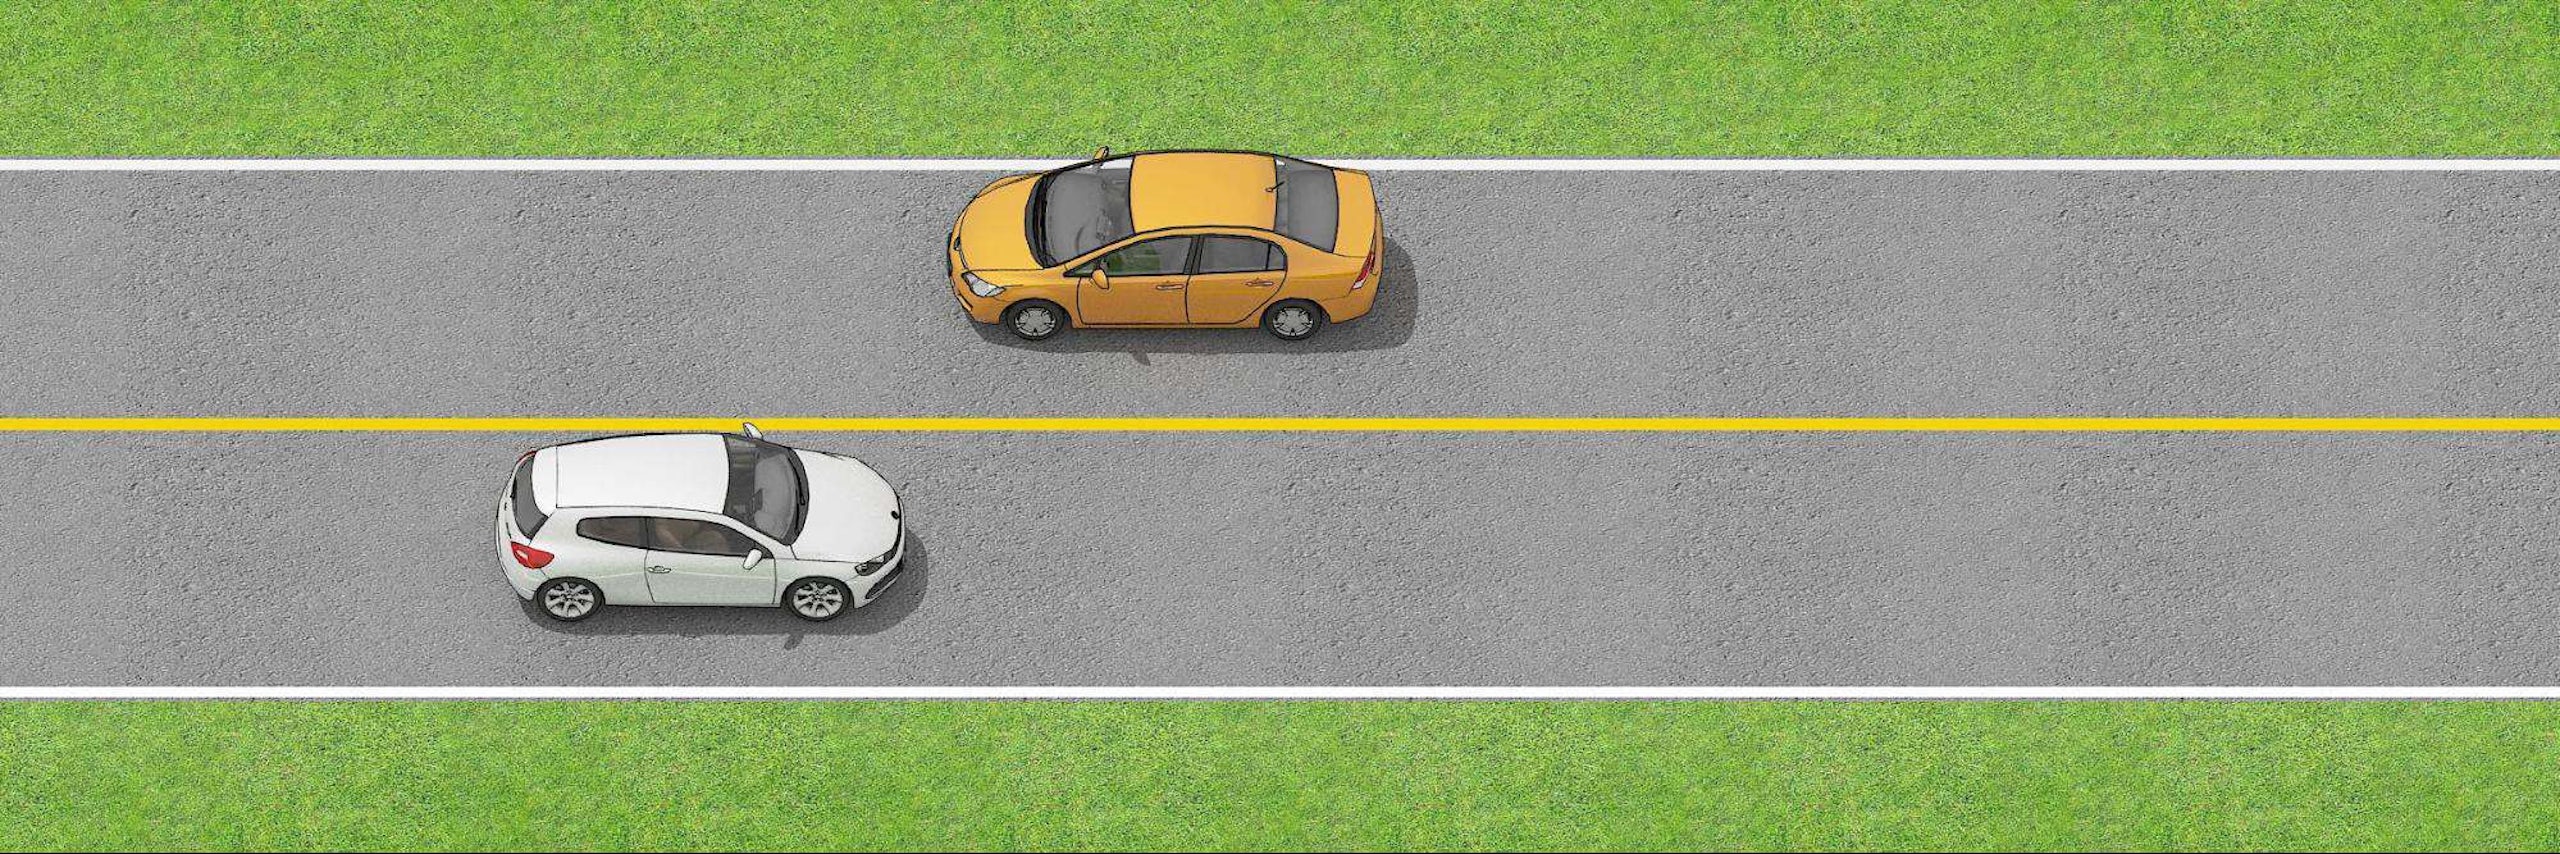 Two vehicles on the road separated by a single solid yellow  line